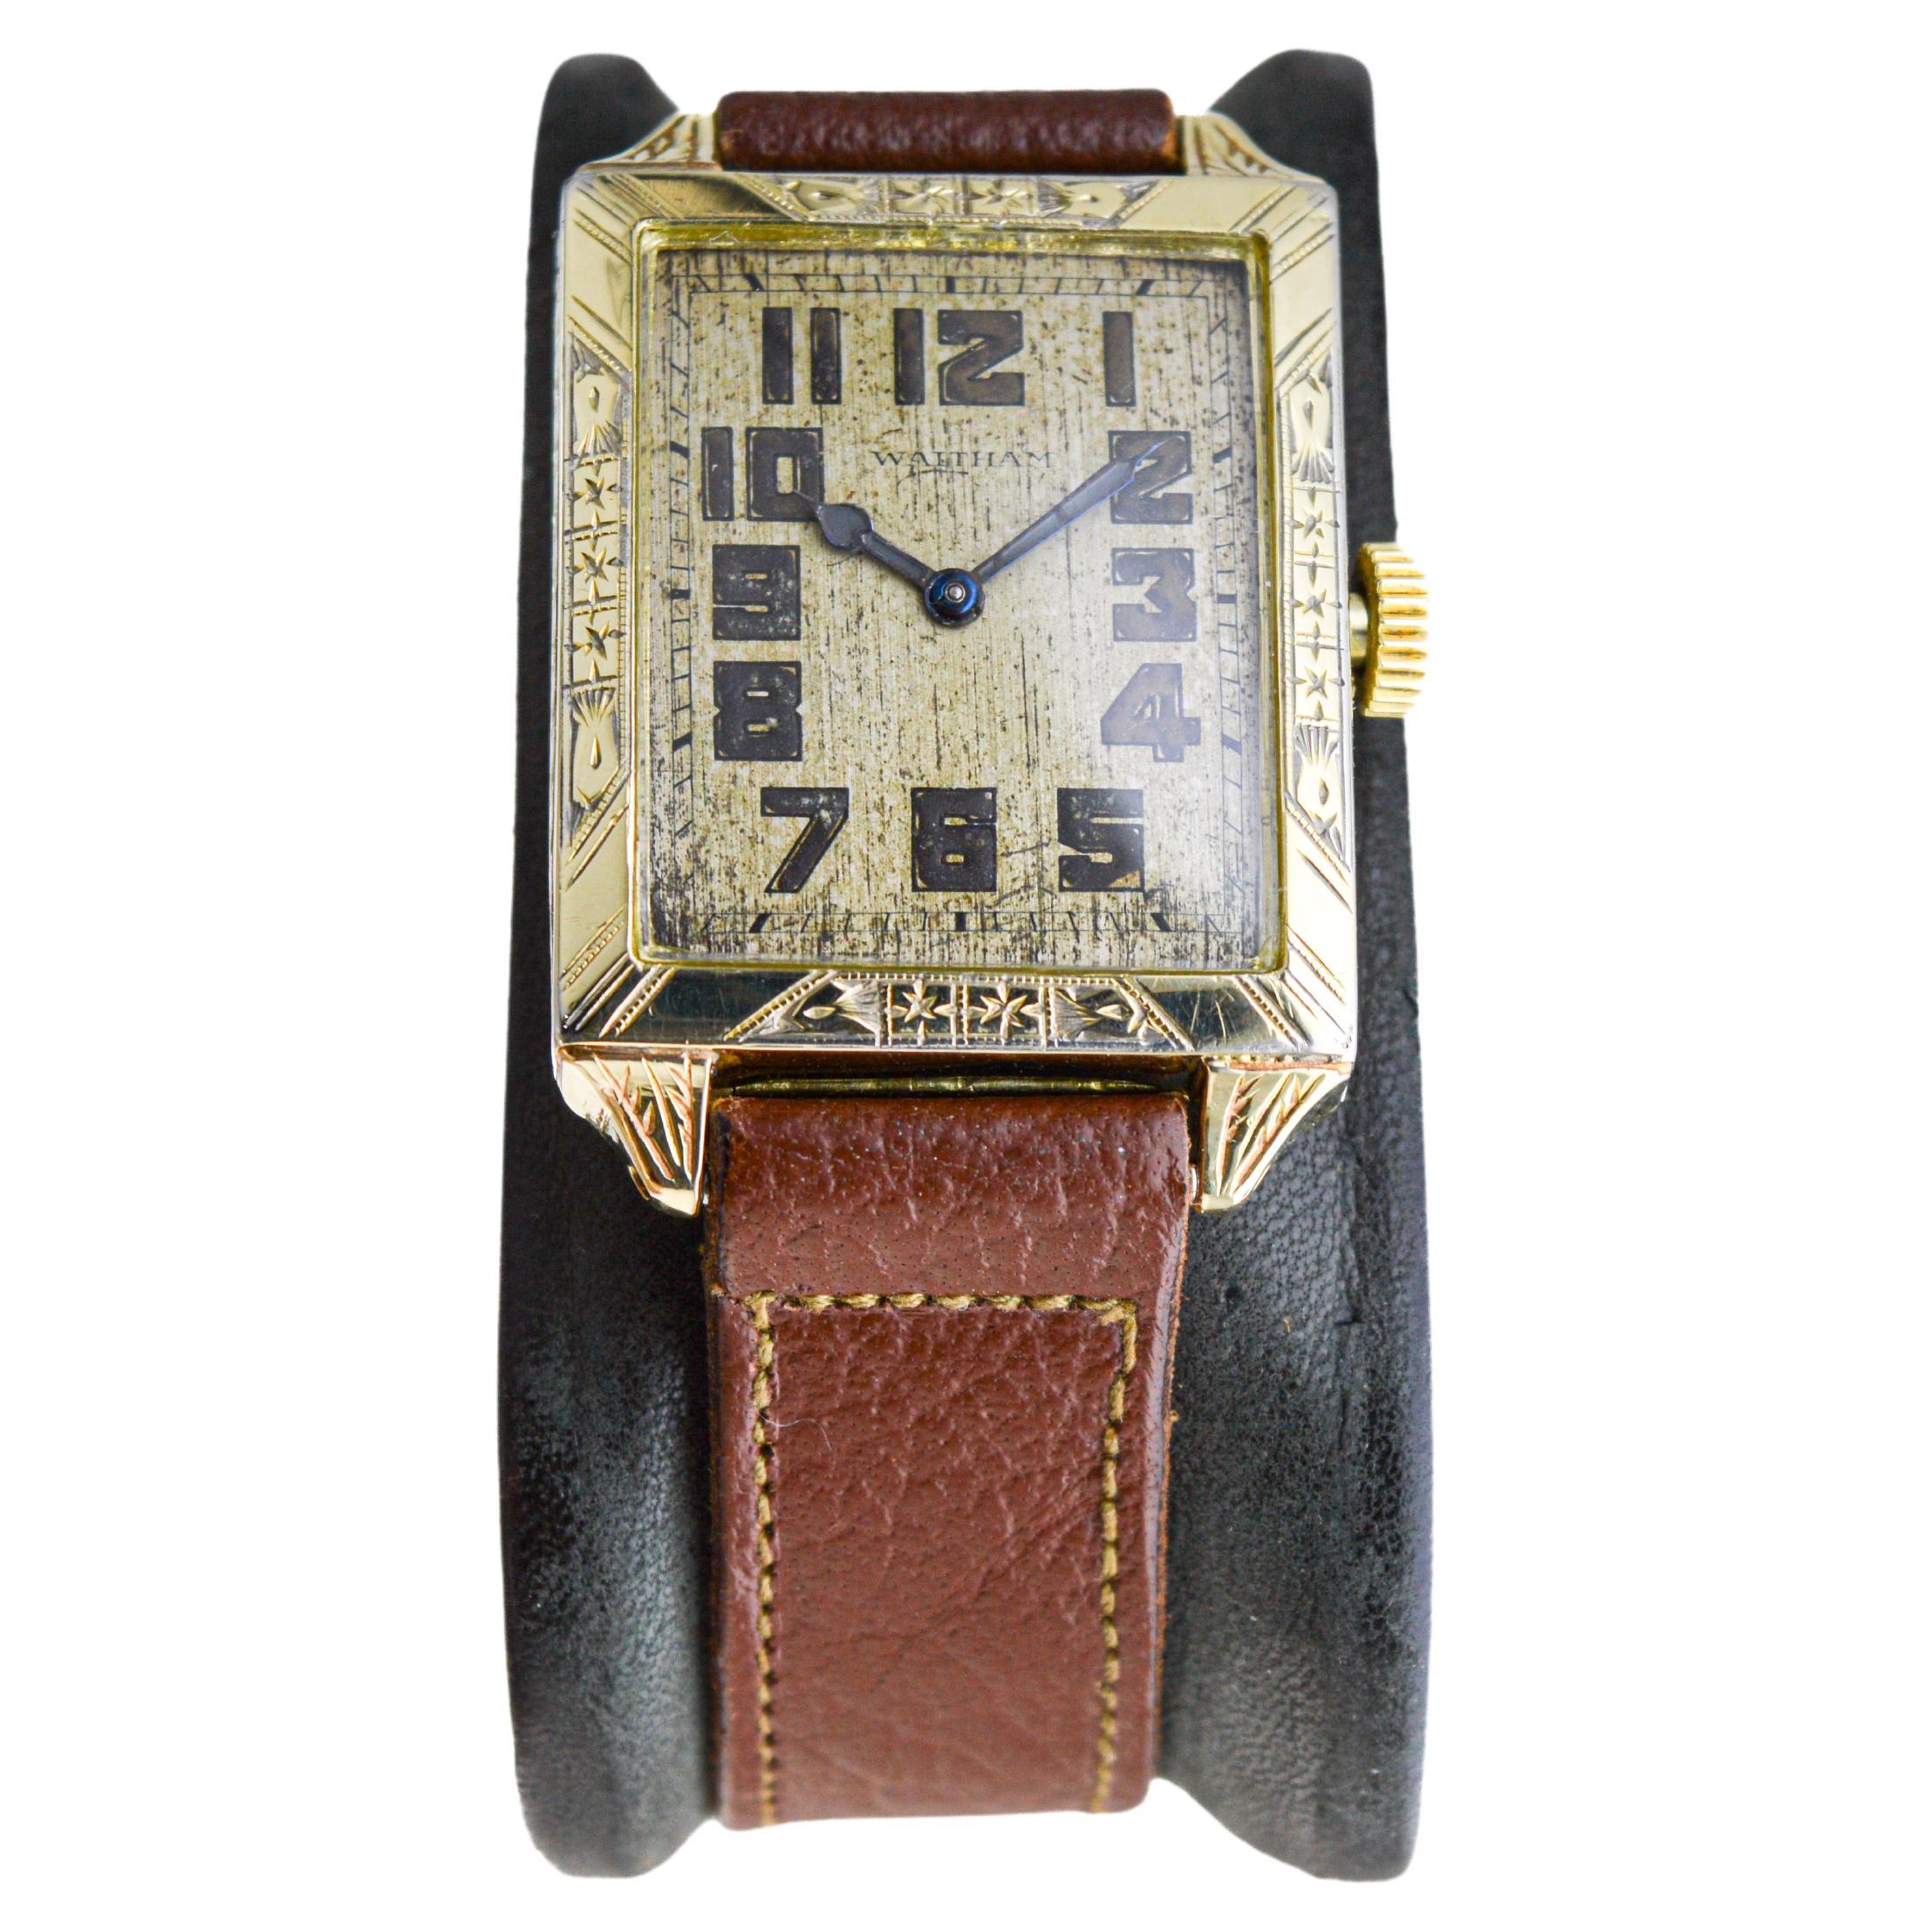 Waltham Yellow Gold Filled Art Deco Watch with Original Dial from 1926 In Excellent Condition For Sale In Long Beach, CA